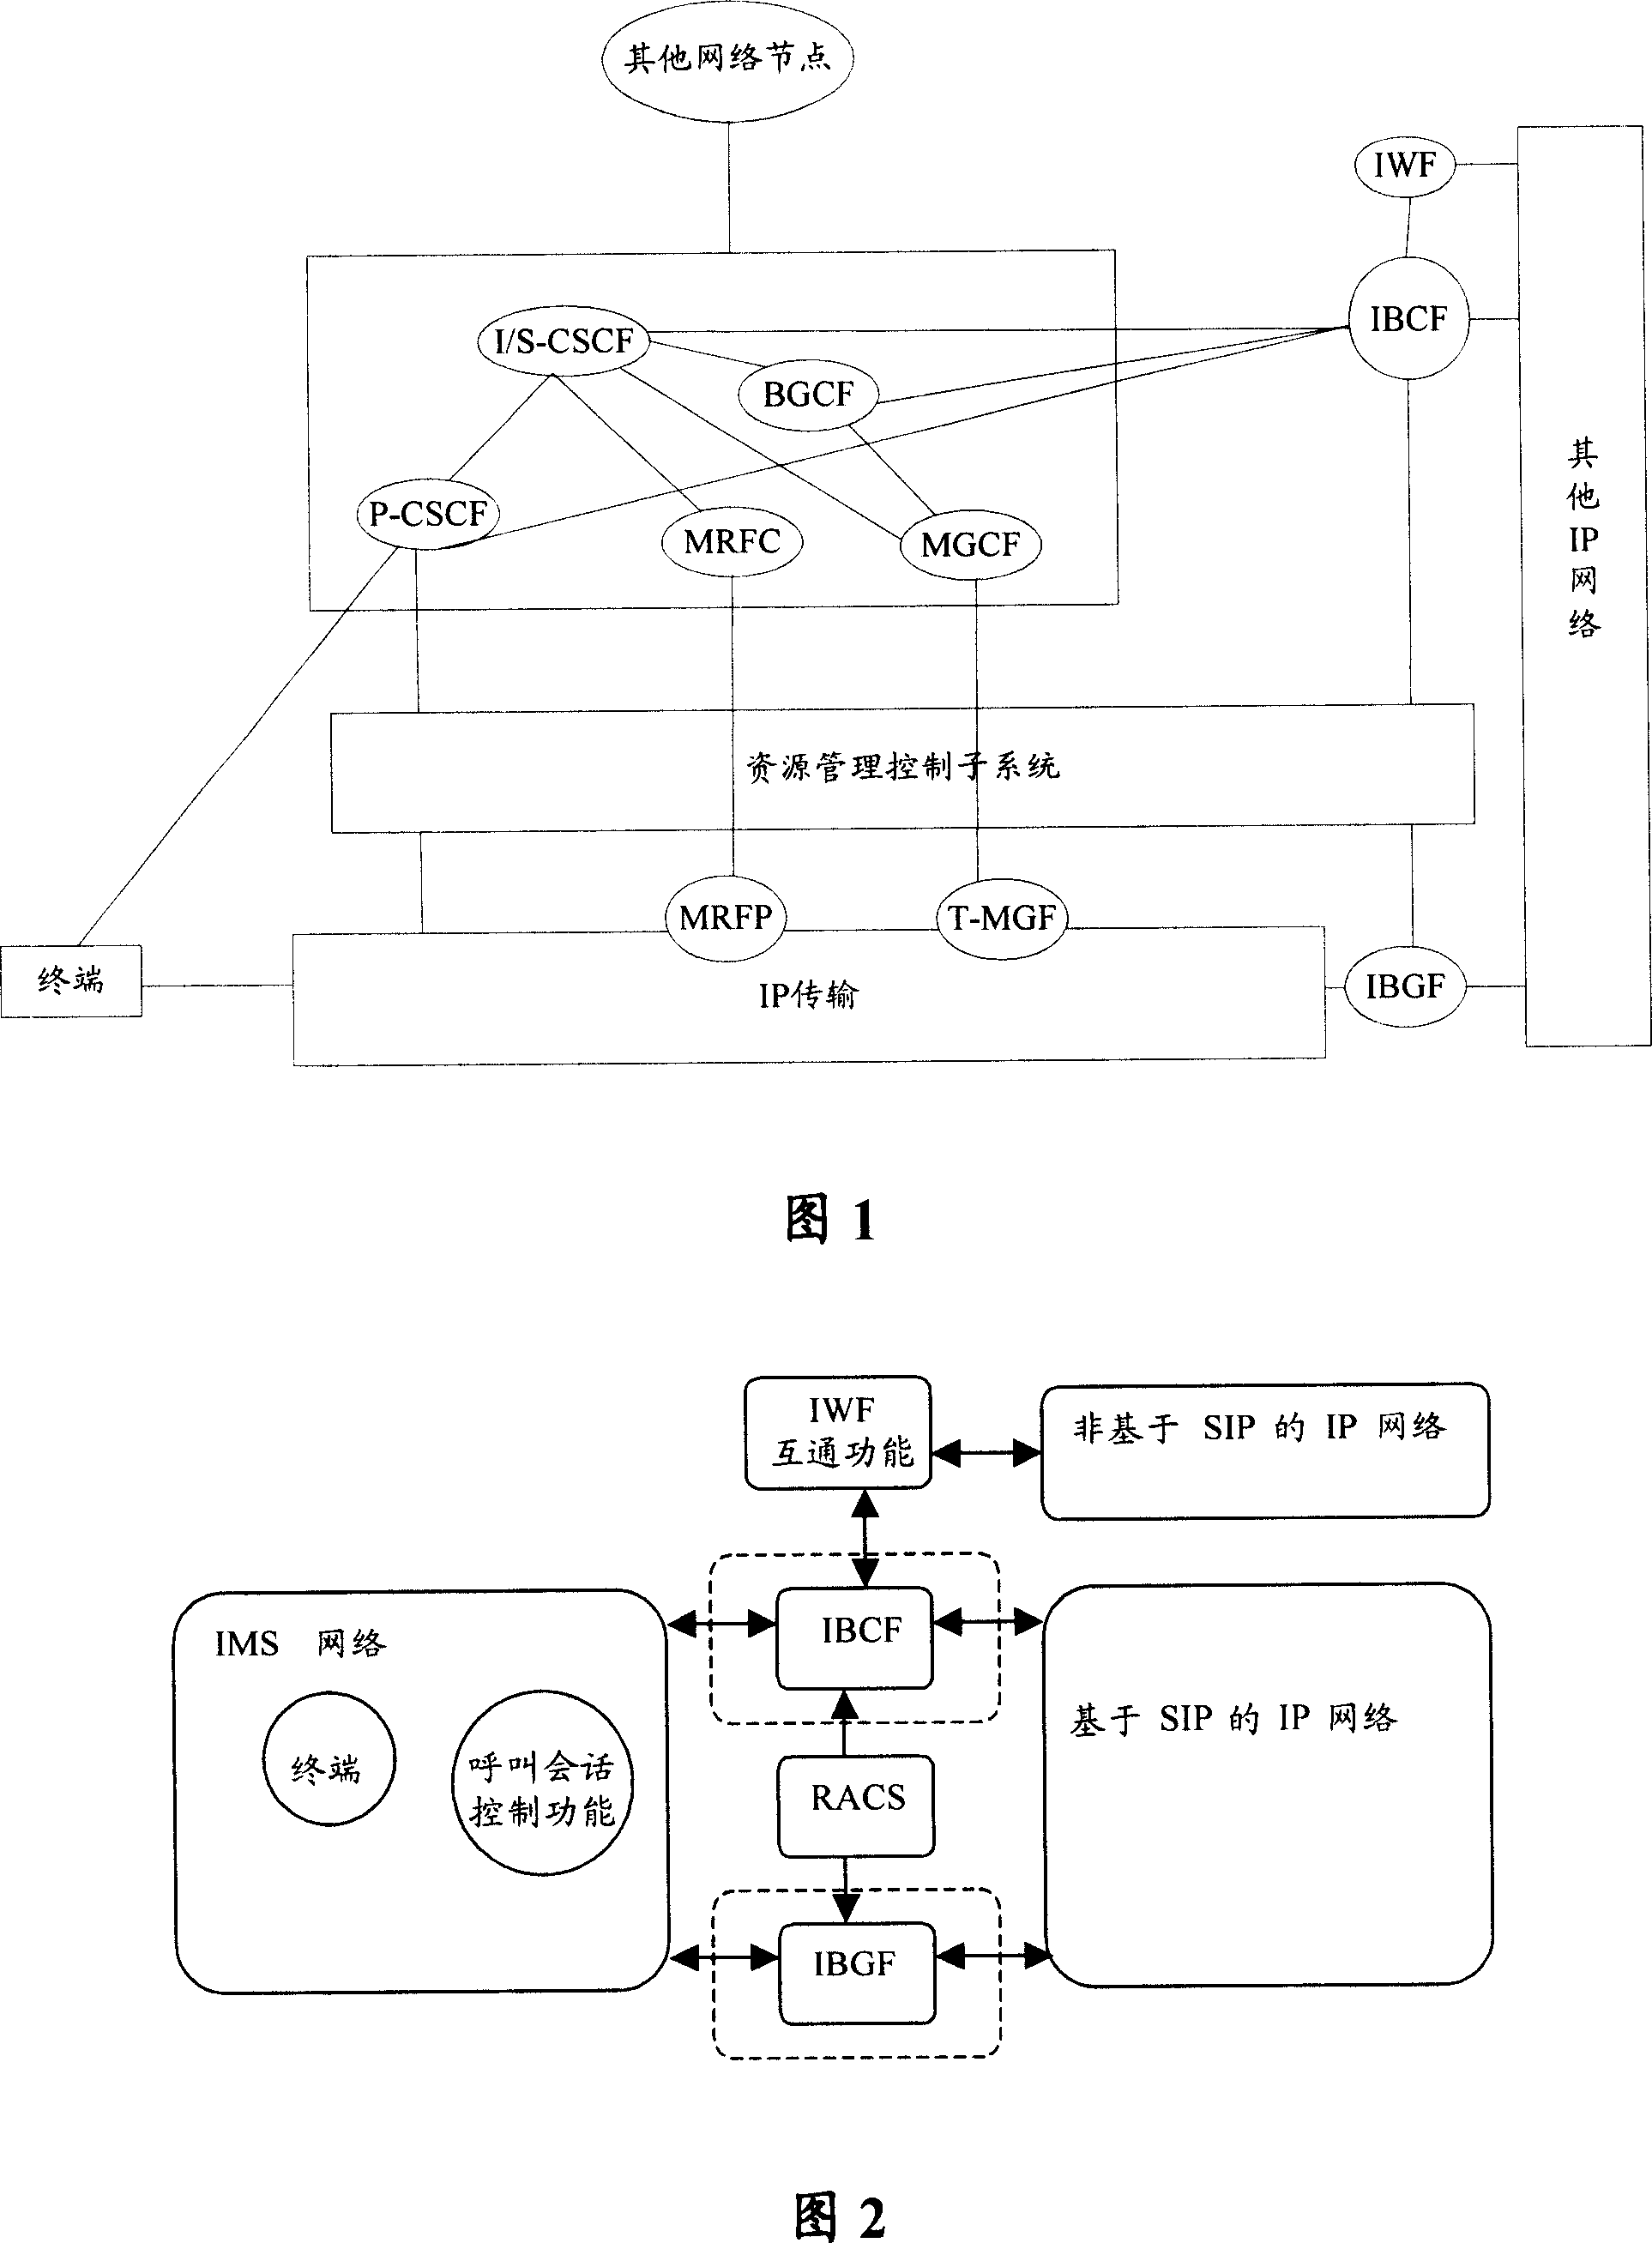 Coding/decoding transition system and method